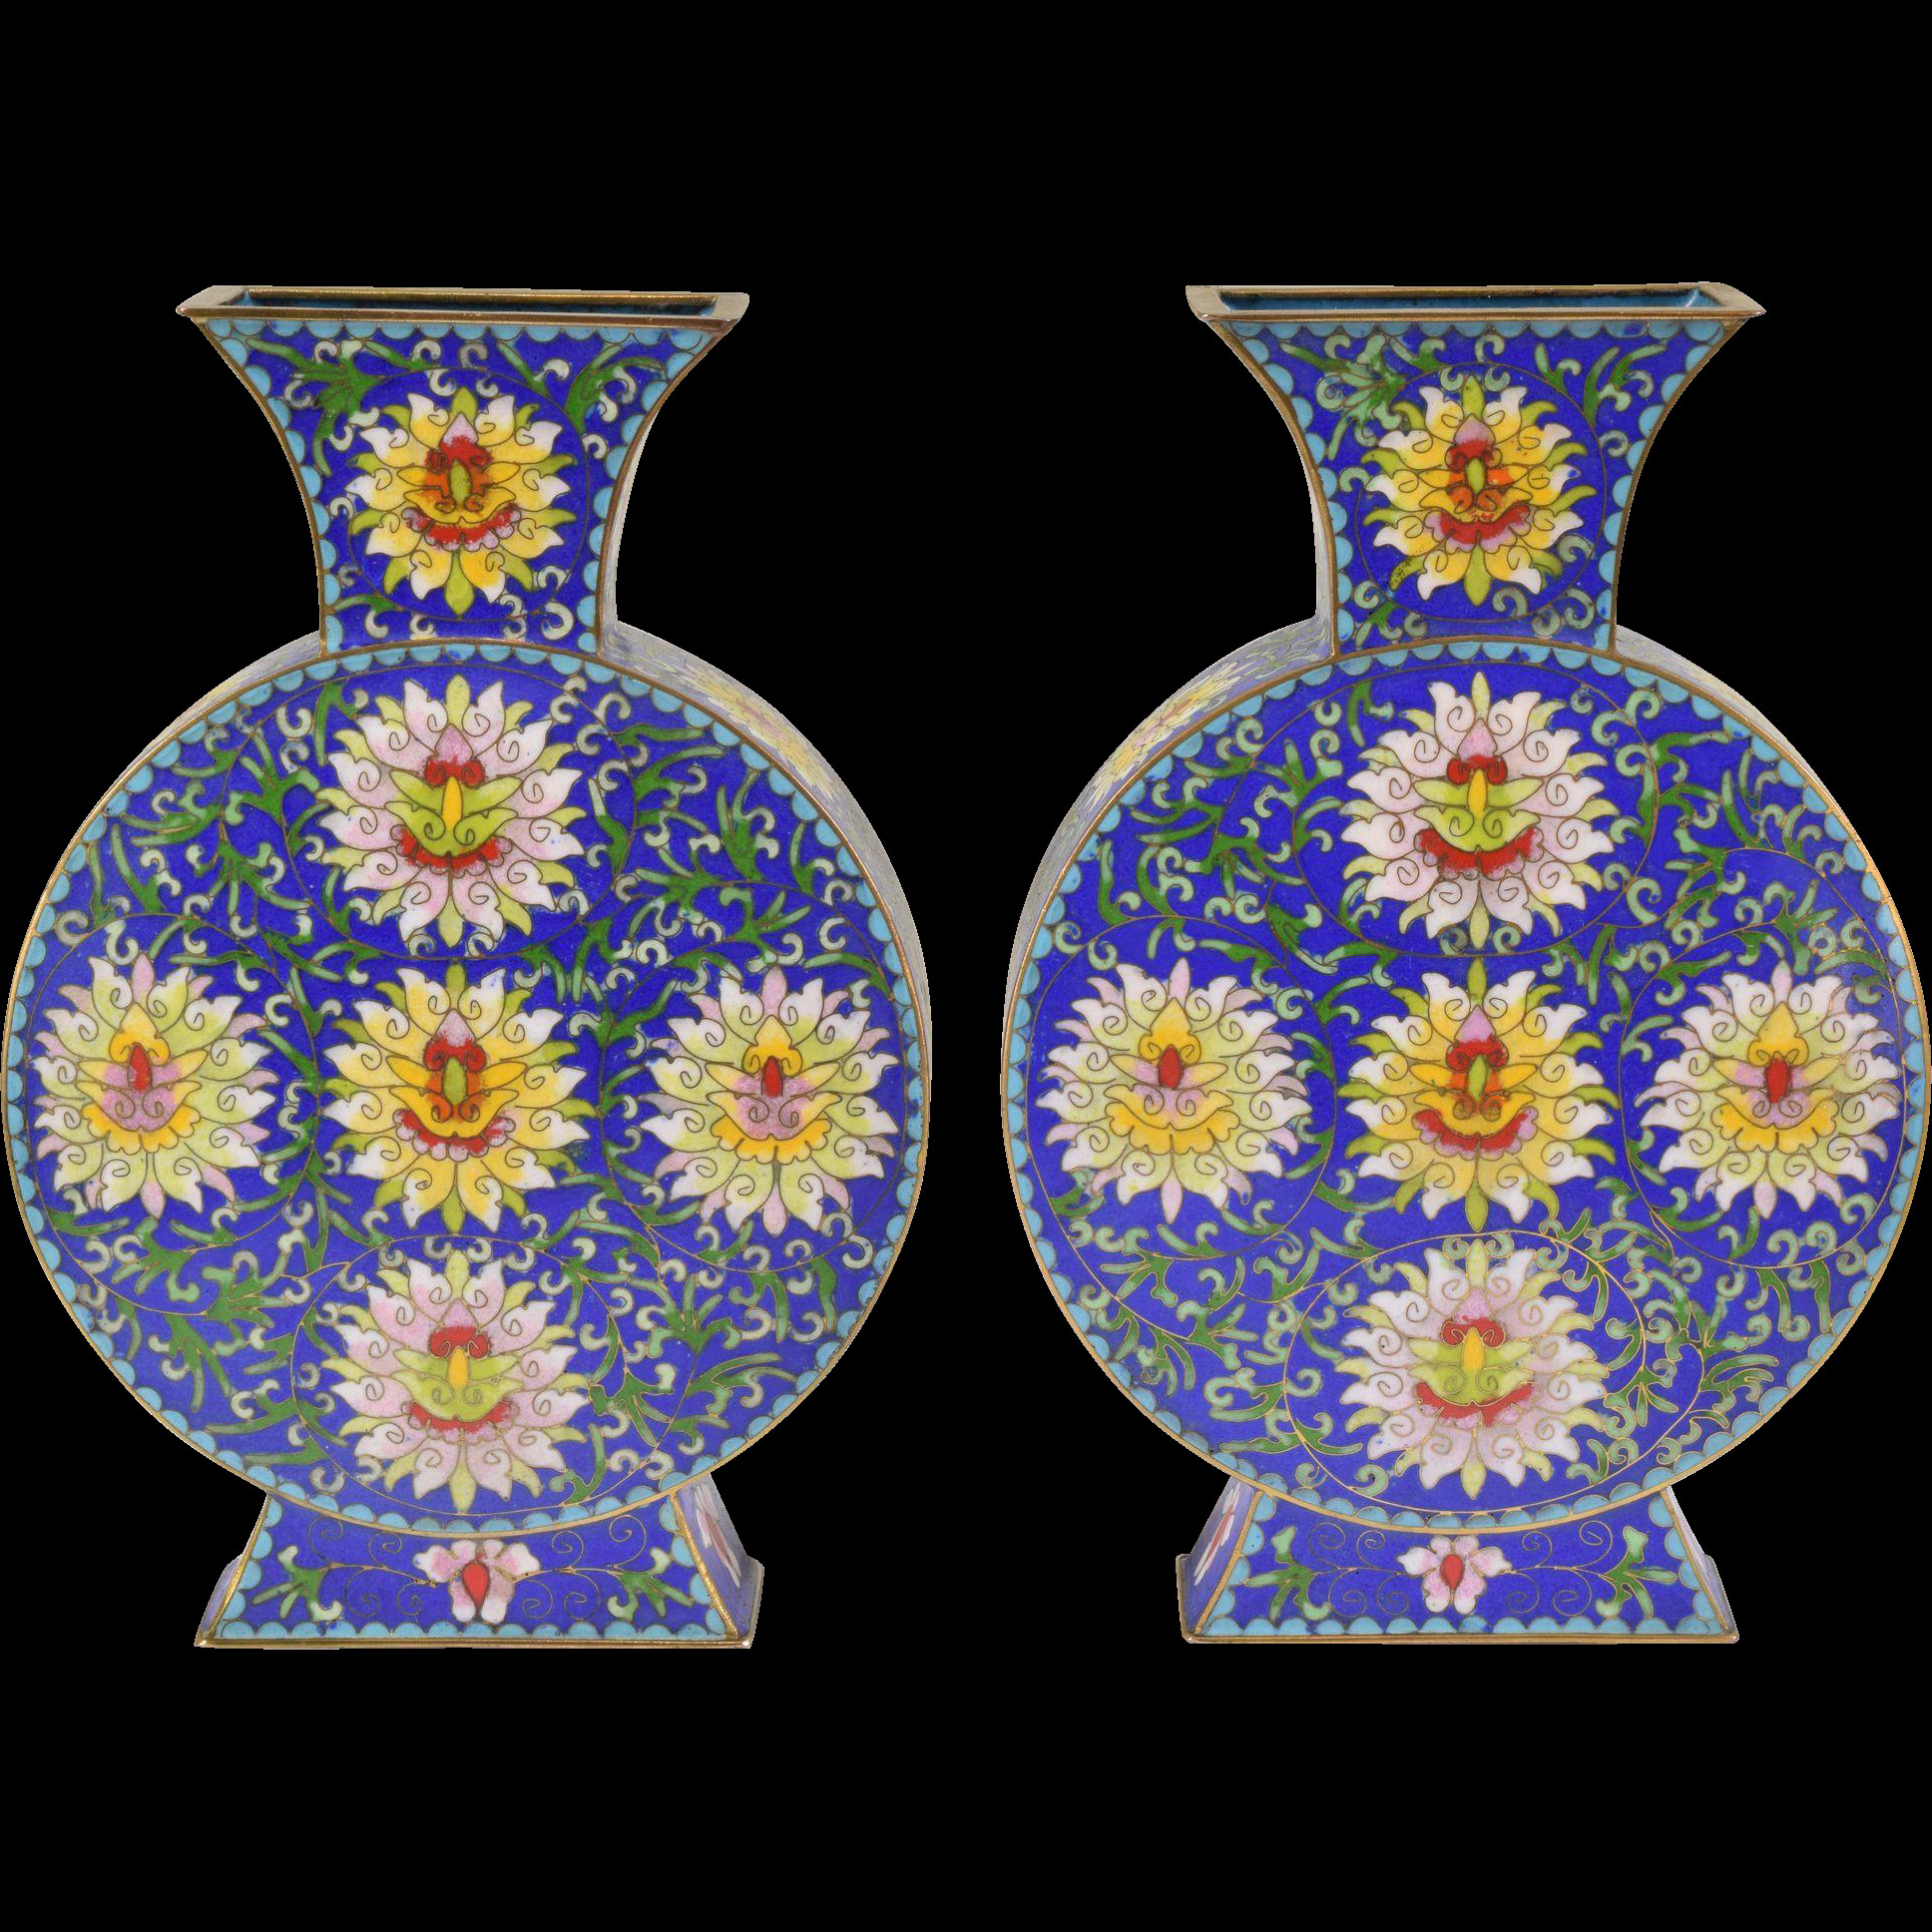 28 Great Pair Of Chinese Cloisonne Vases 2024 free download pair of chinese cloisonne vases of pair vintage petite blue cloisonne pillow type vases with yellow in pair vintage petite blue cloisonne pillow type vases with yellow red the old light ware